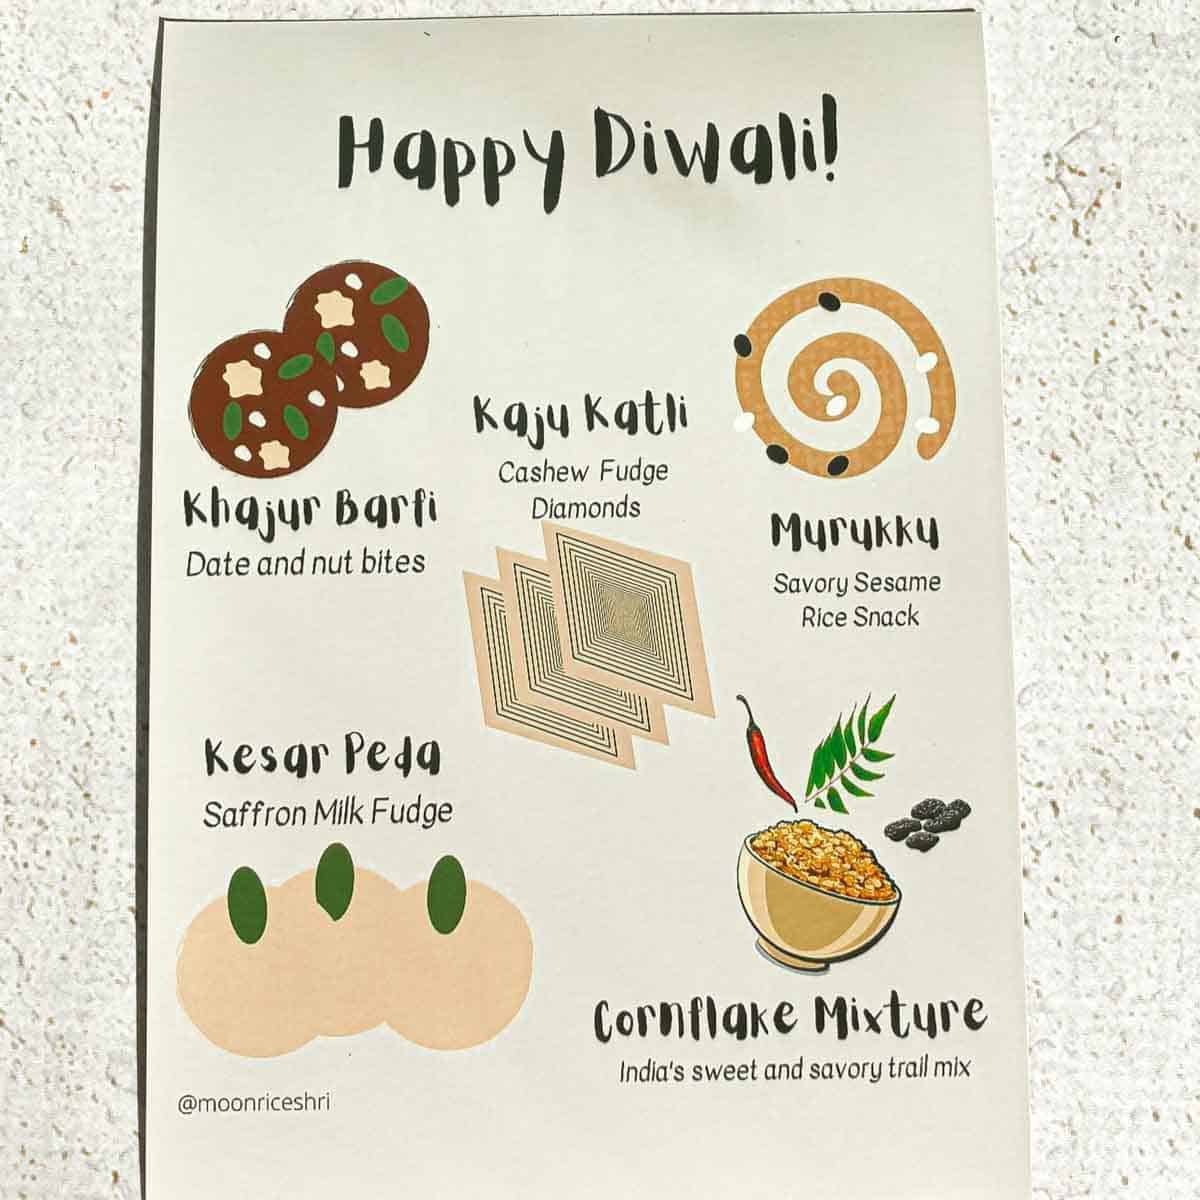 Diwali card with description of sweets and snacks